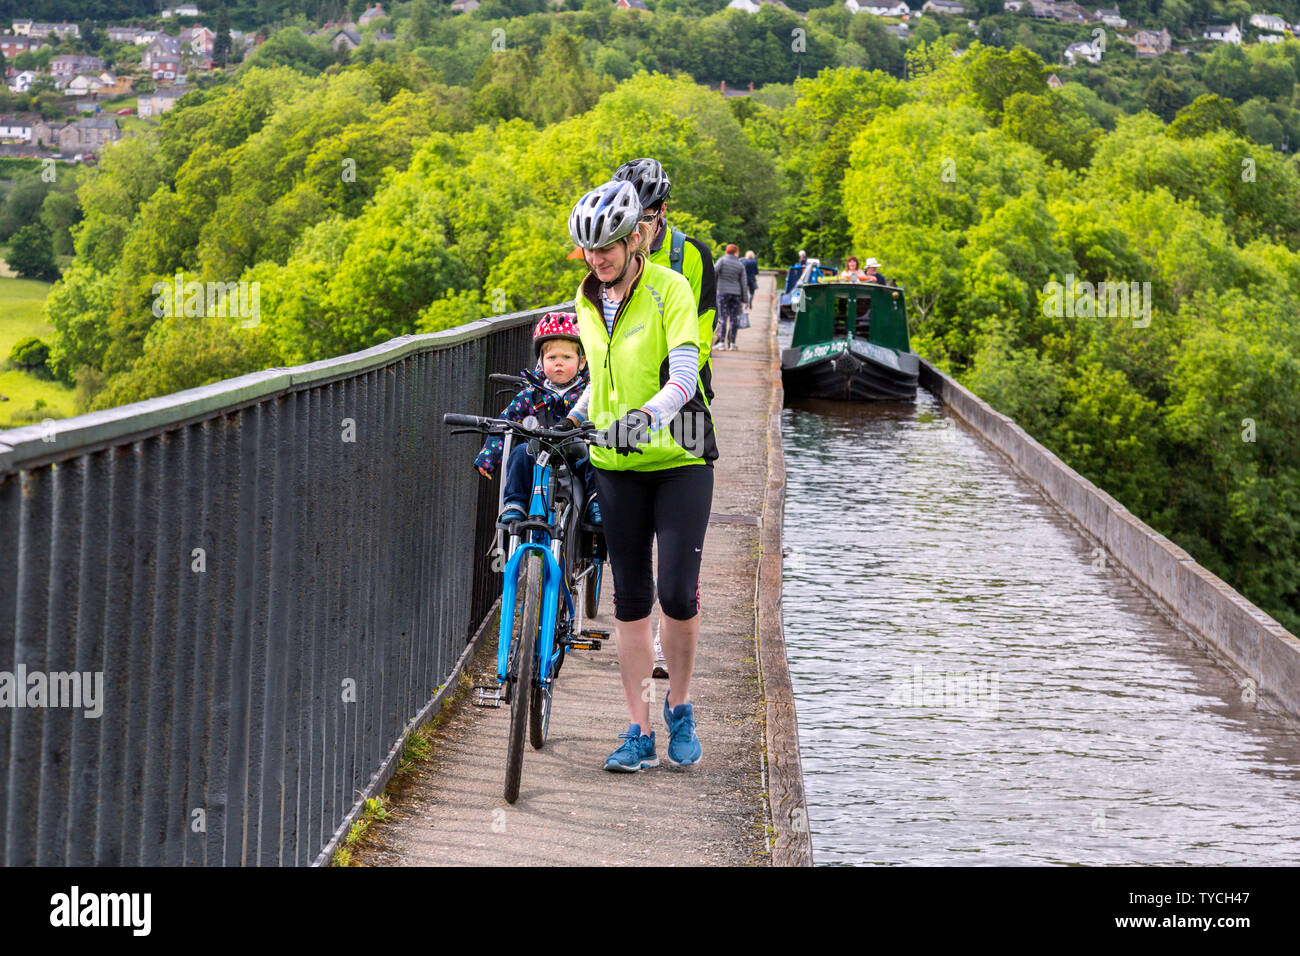 Cyclists use the tow path across Thomas Telford's magnificent Pontcysyllte aqueduct on the Llangollen Canal, Clwyd,Wales, UK Stock Photo